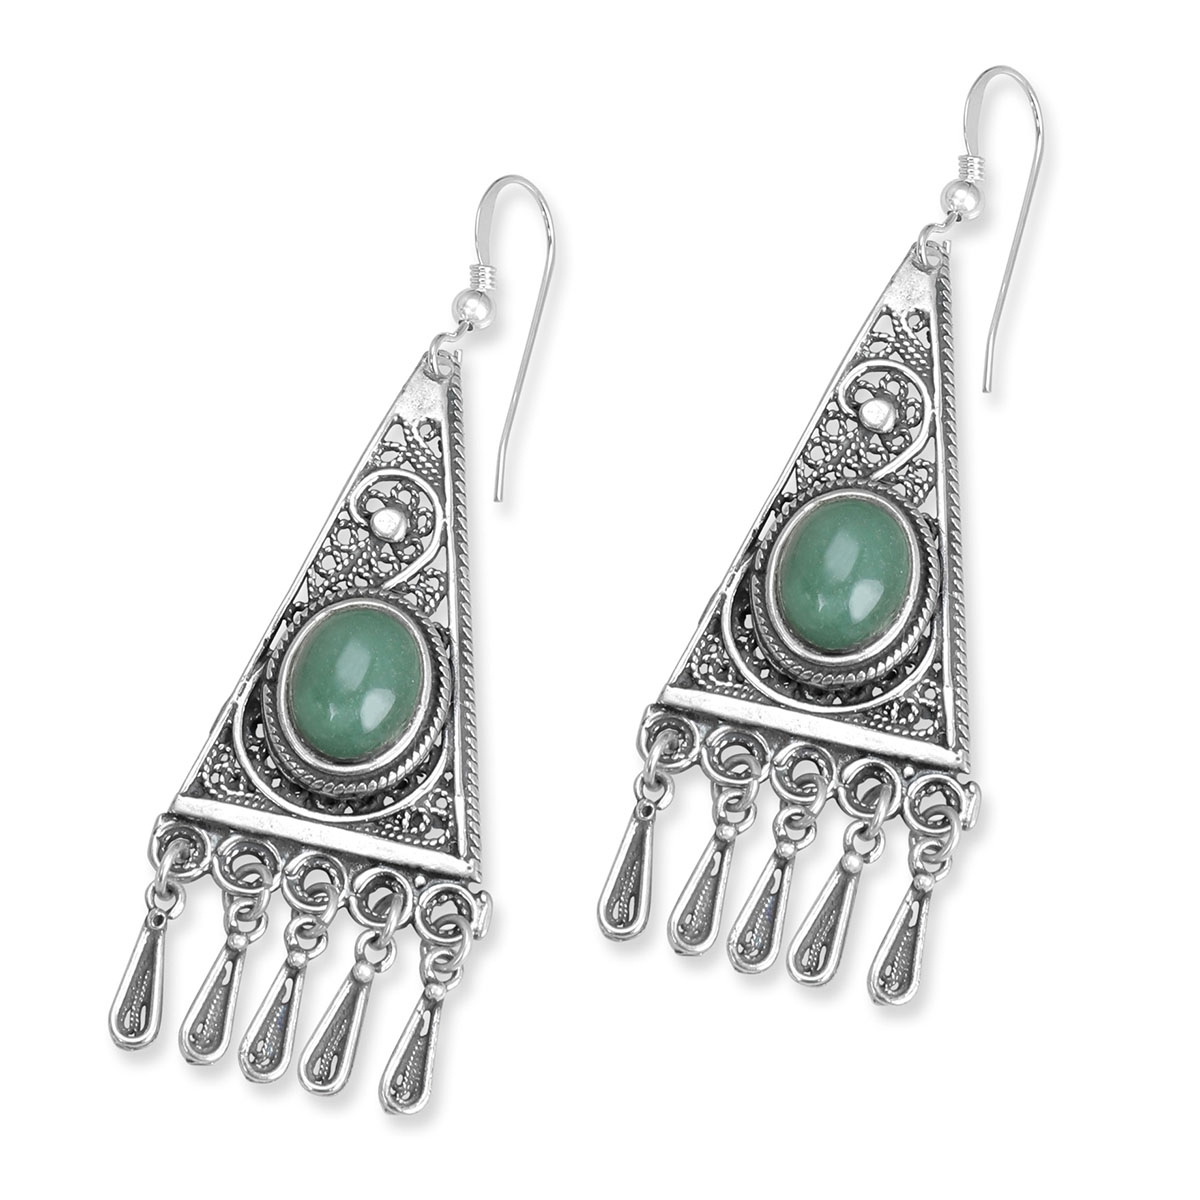 Traditional Yemenite Art Handcrafted Sterling Silver Filigree Triangle Earrings With Green Aventurine Stone - 1